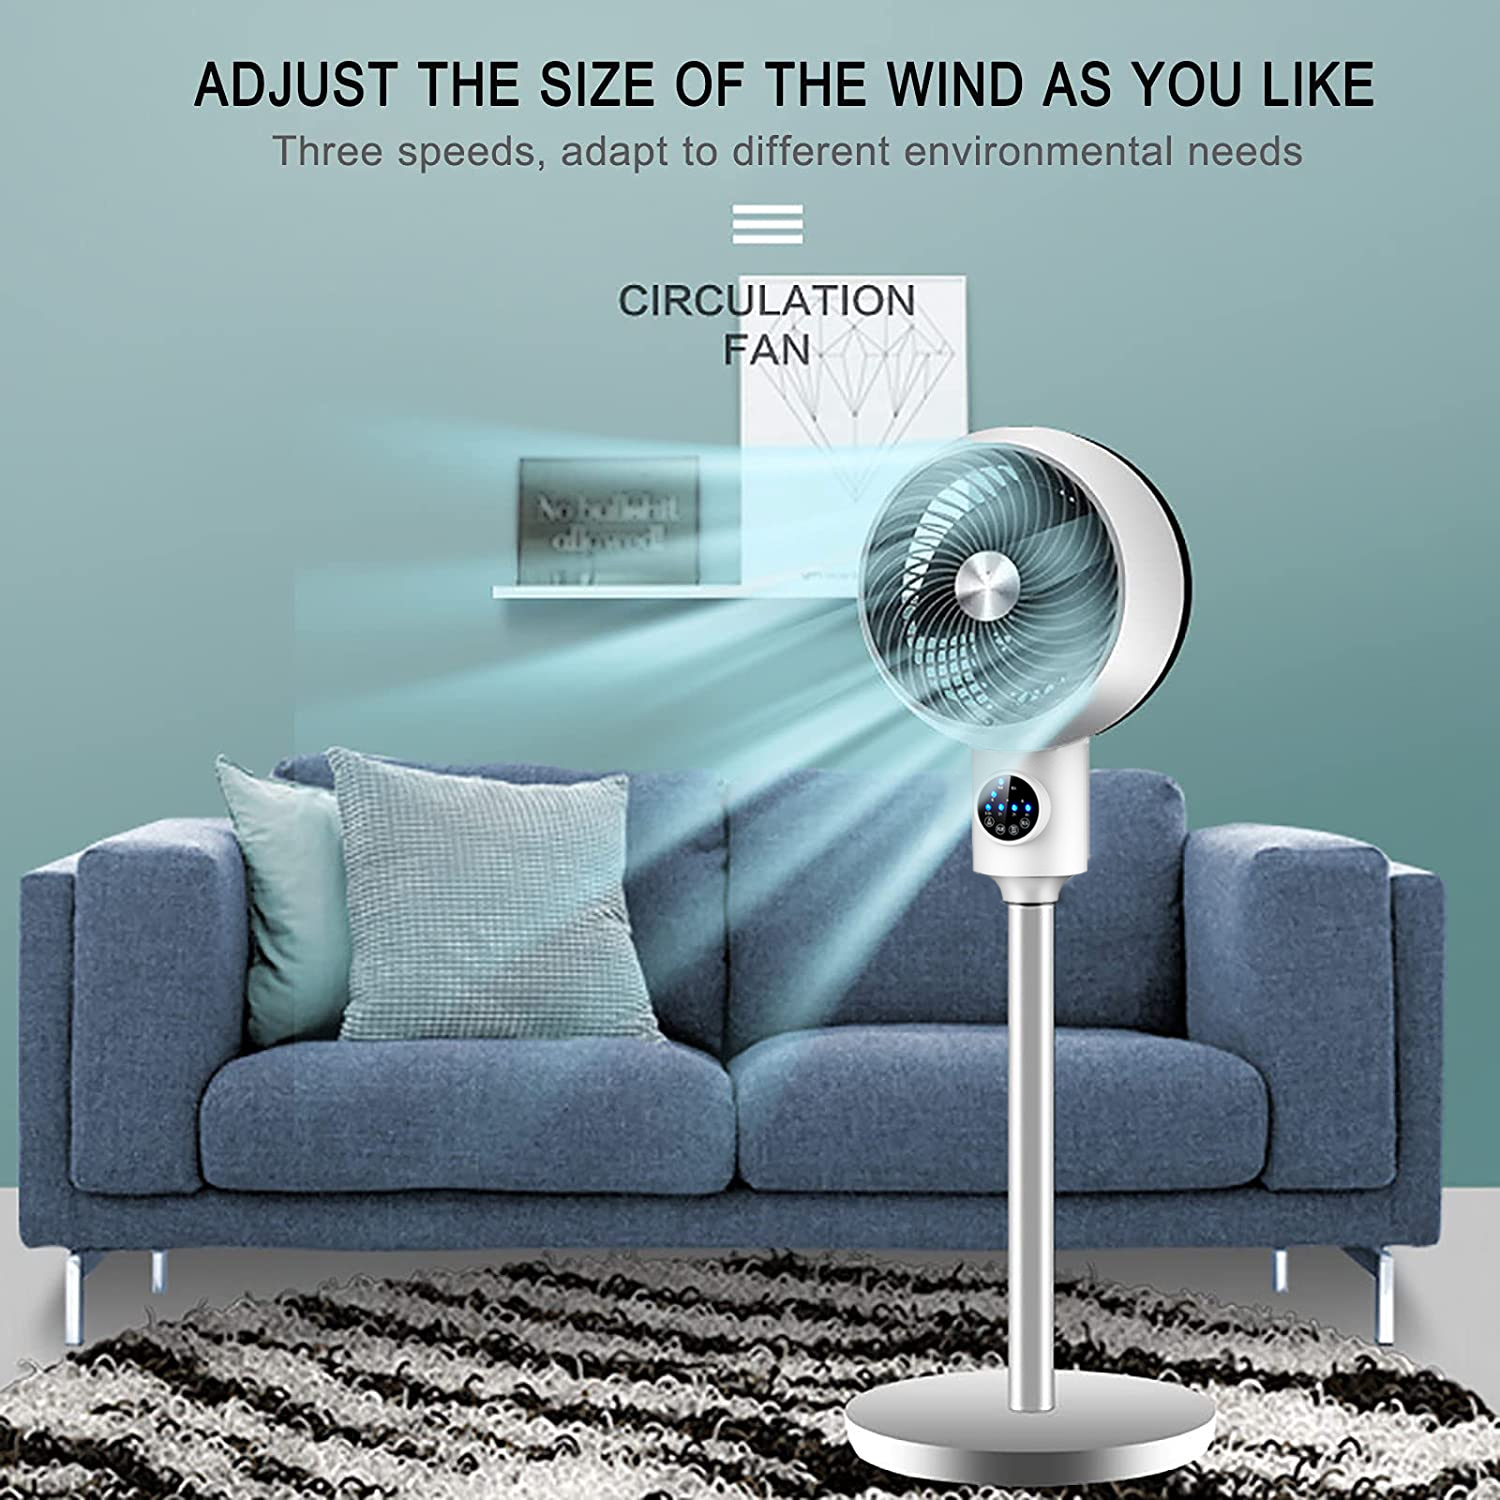 SUGIFT Fans for Home, Whole Room Air Circulator Fan, 3 Speeds for Office, Bedroom, White - image 4 of 7